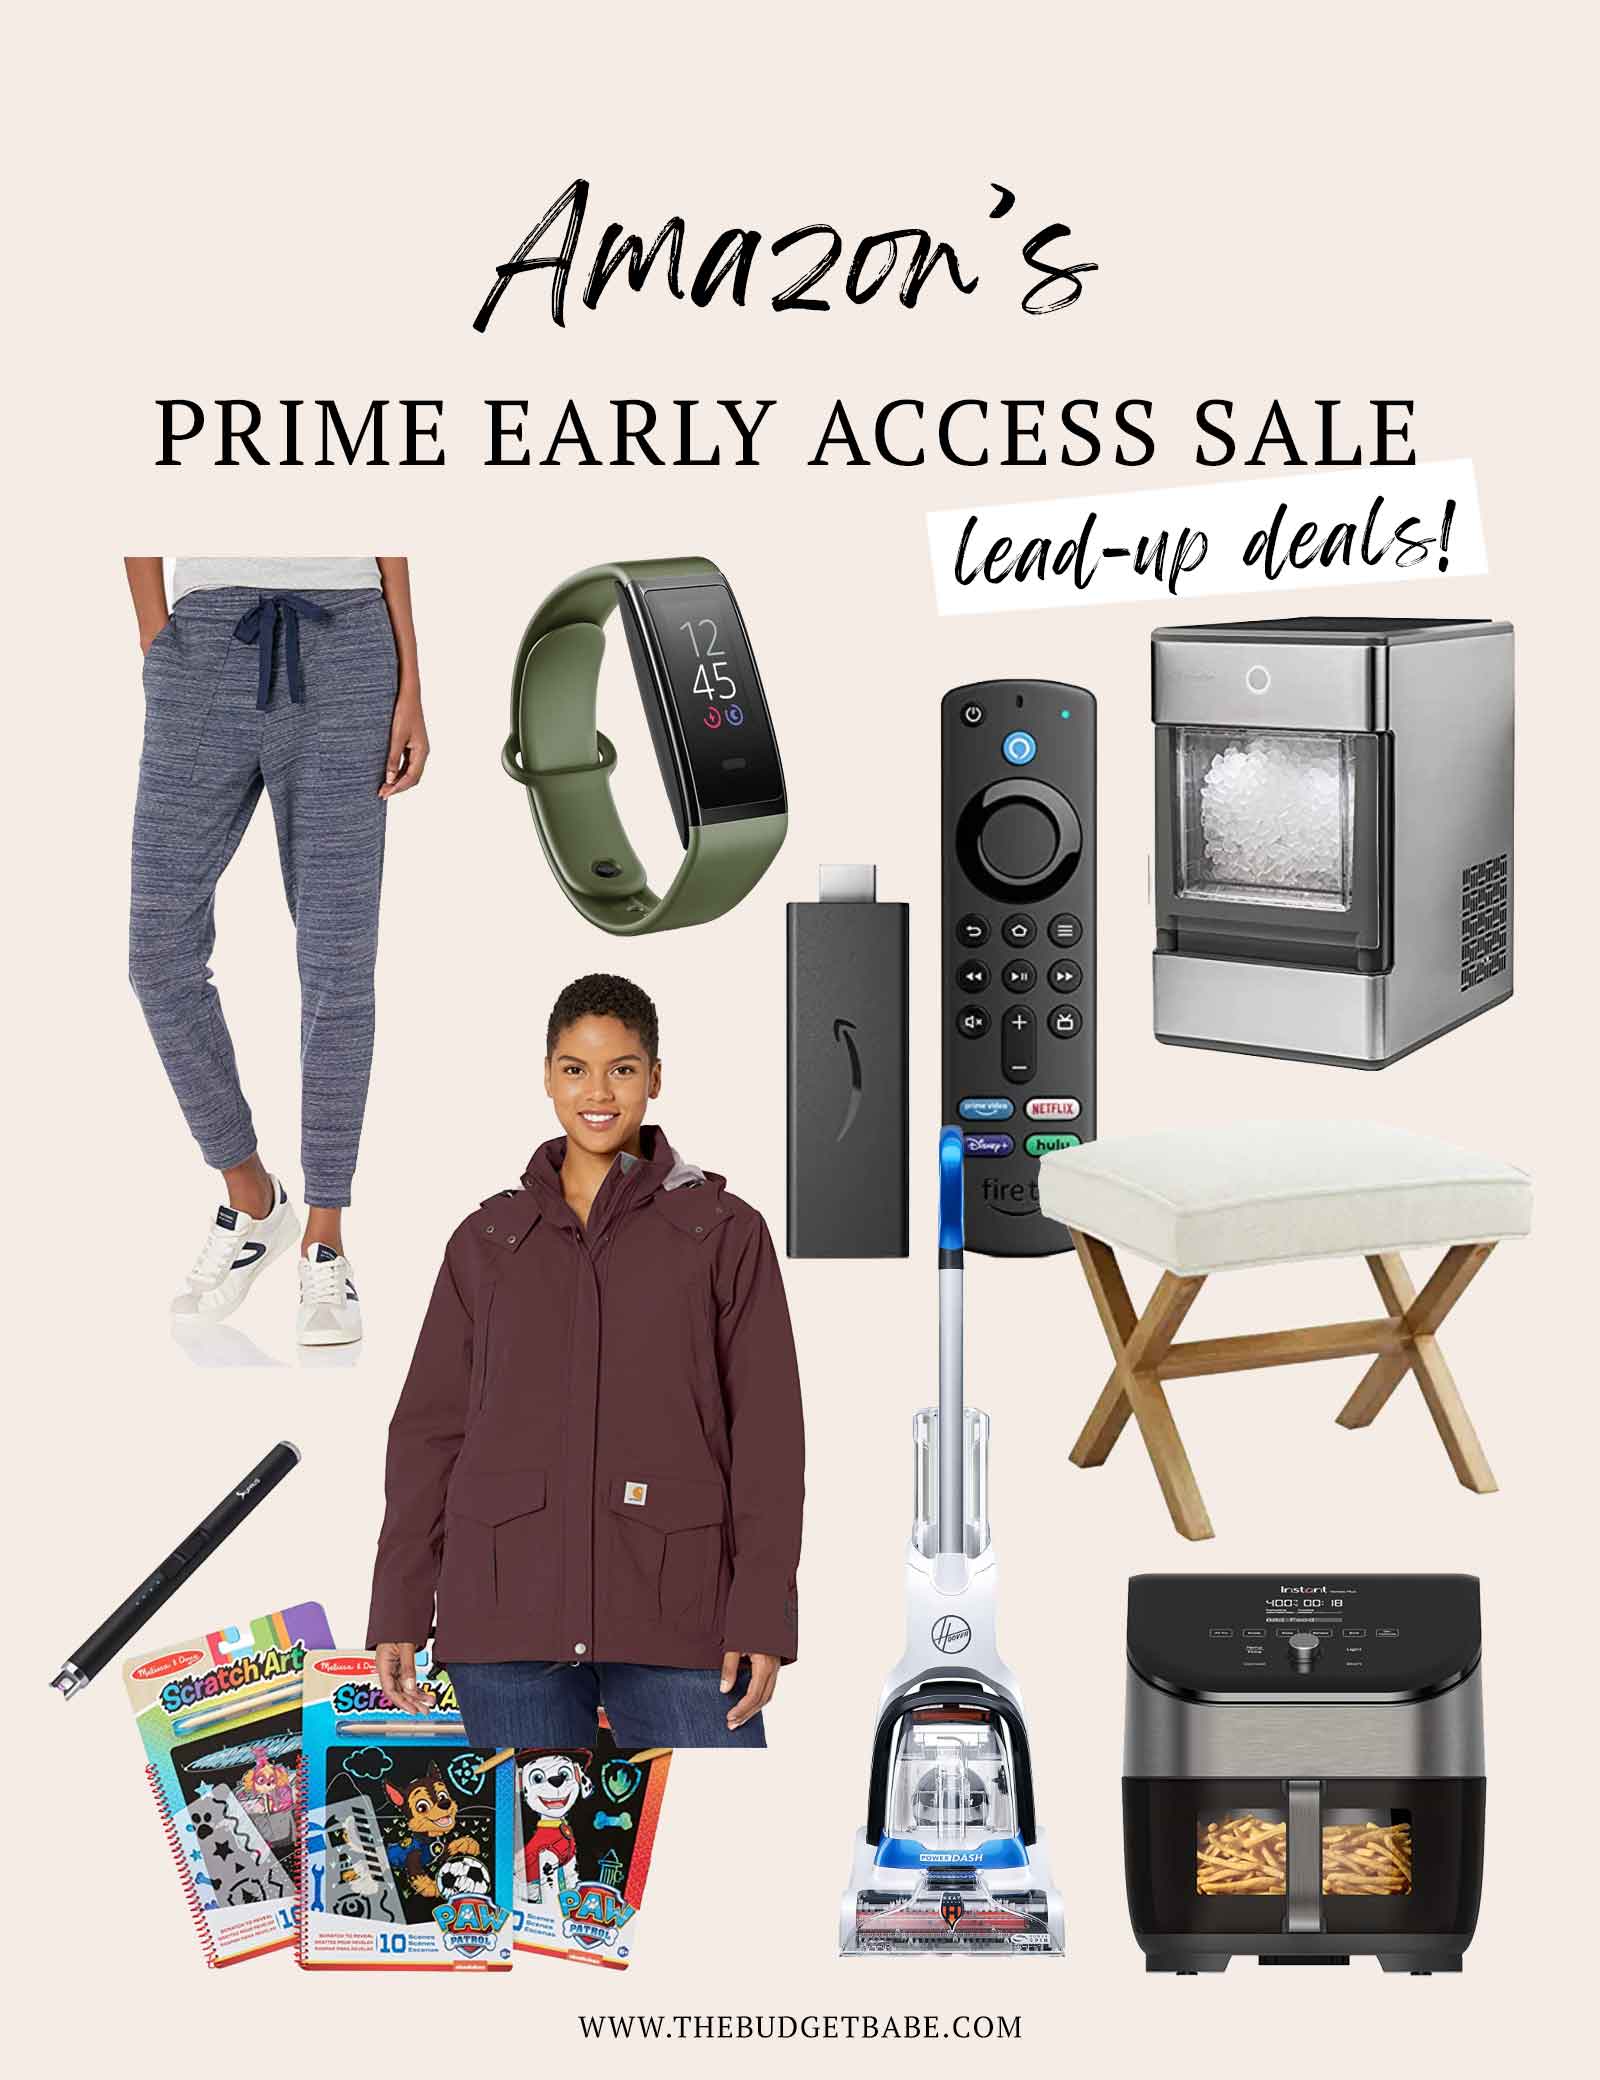 Amazon Prime Early Access Sale - everything you need to know